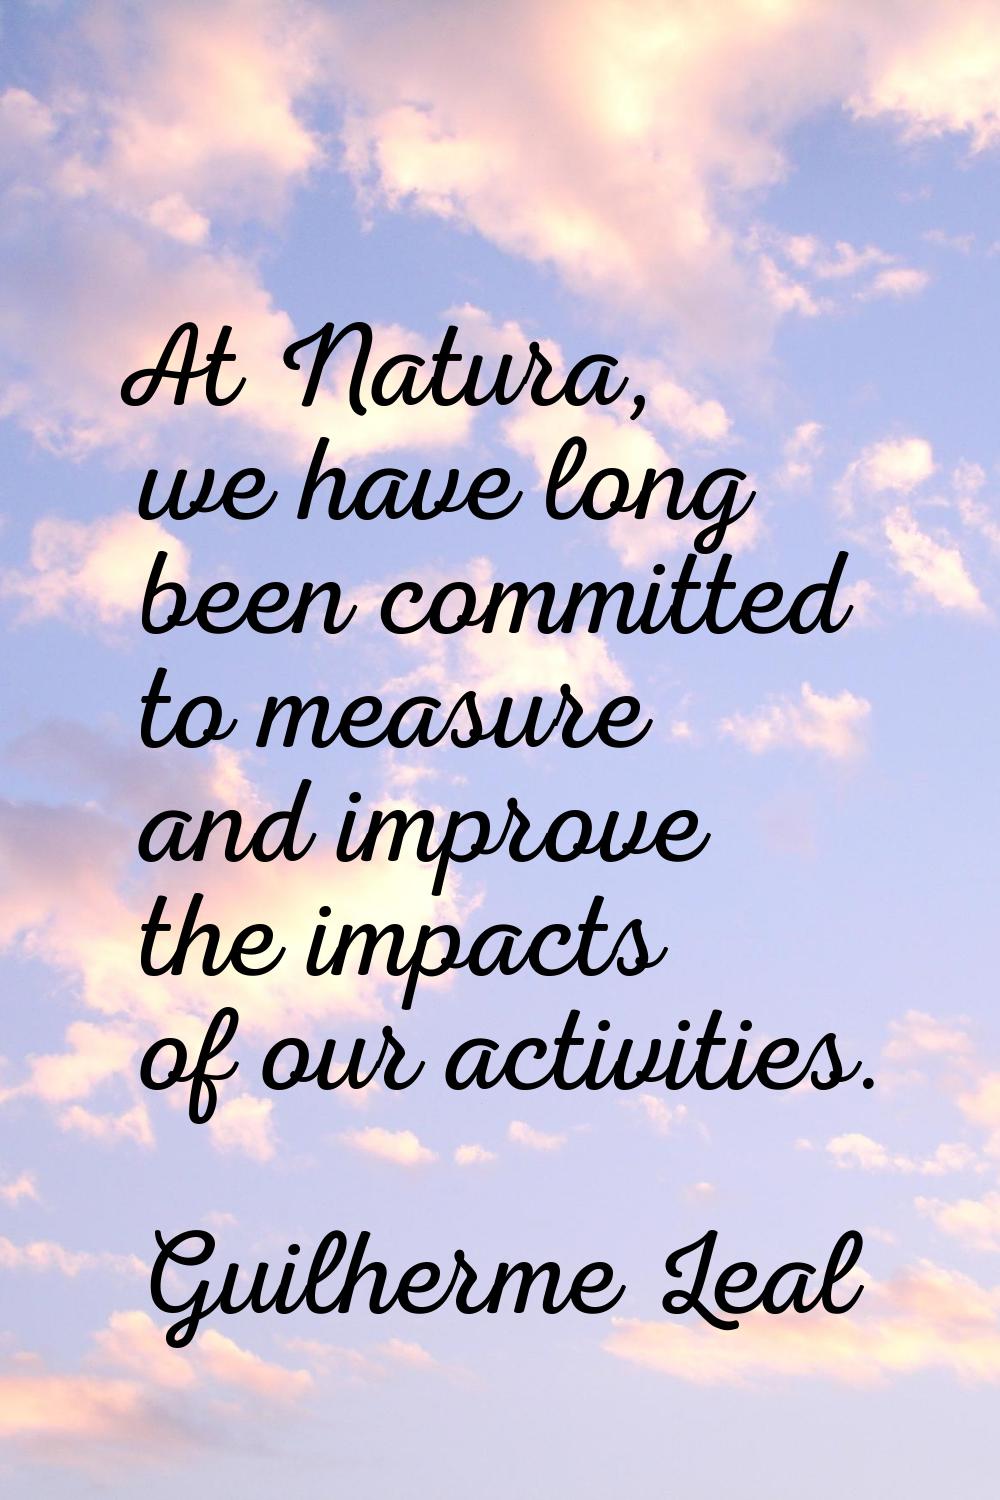 At Natura, we have long been committed to measure and improve the impacts of our activities.